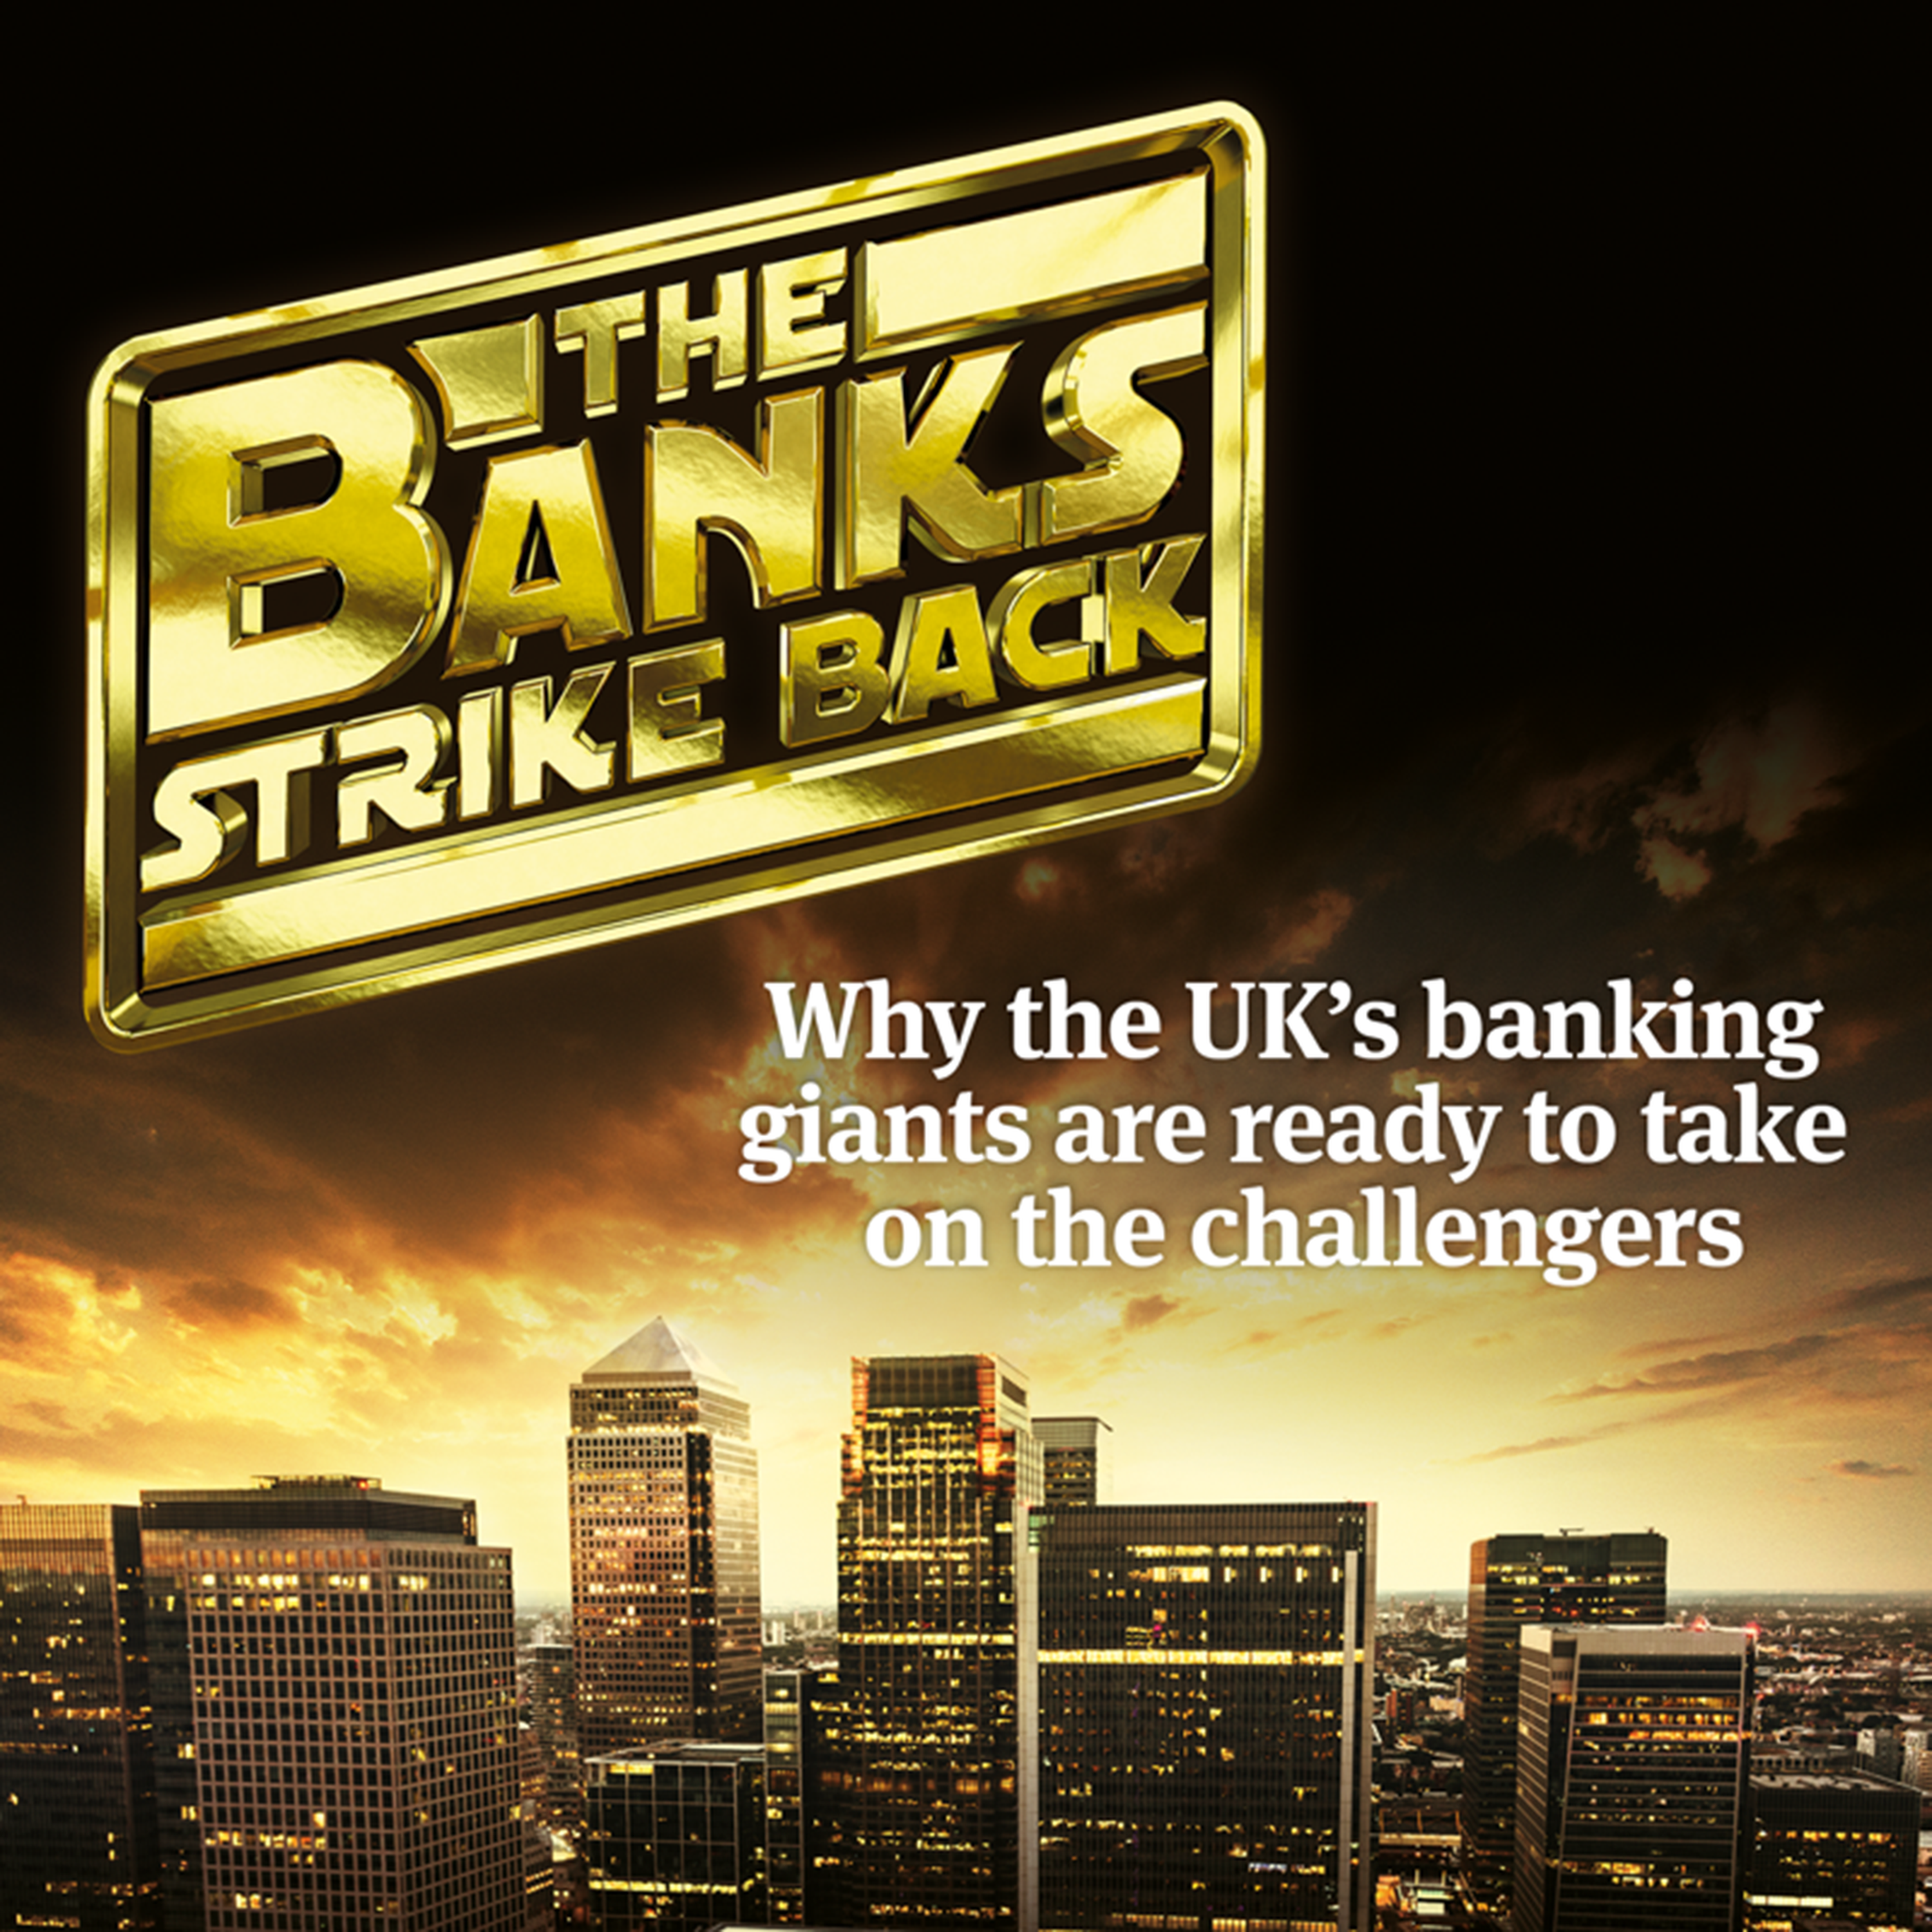 Companies & Markets: Battle of the banks